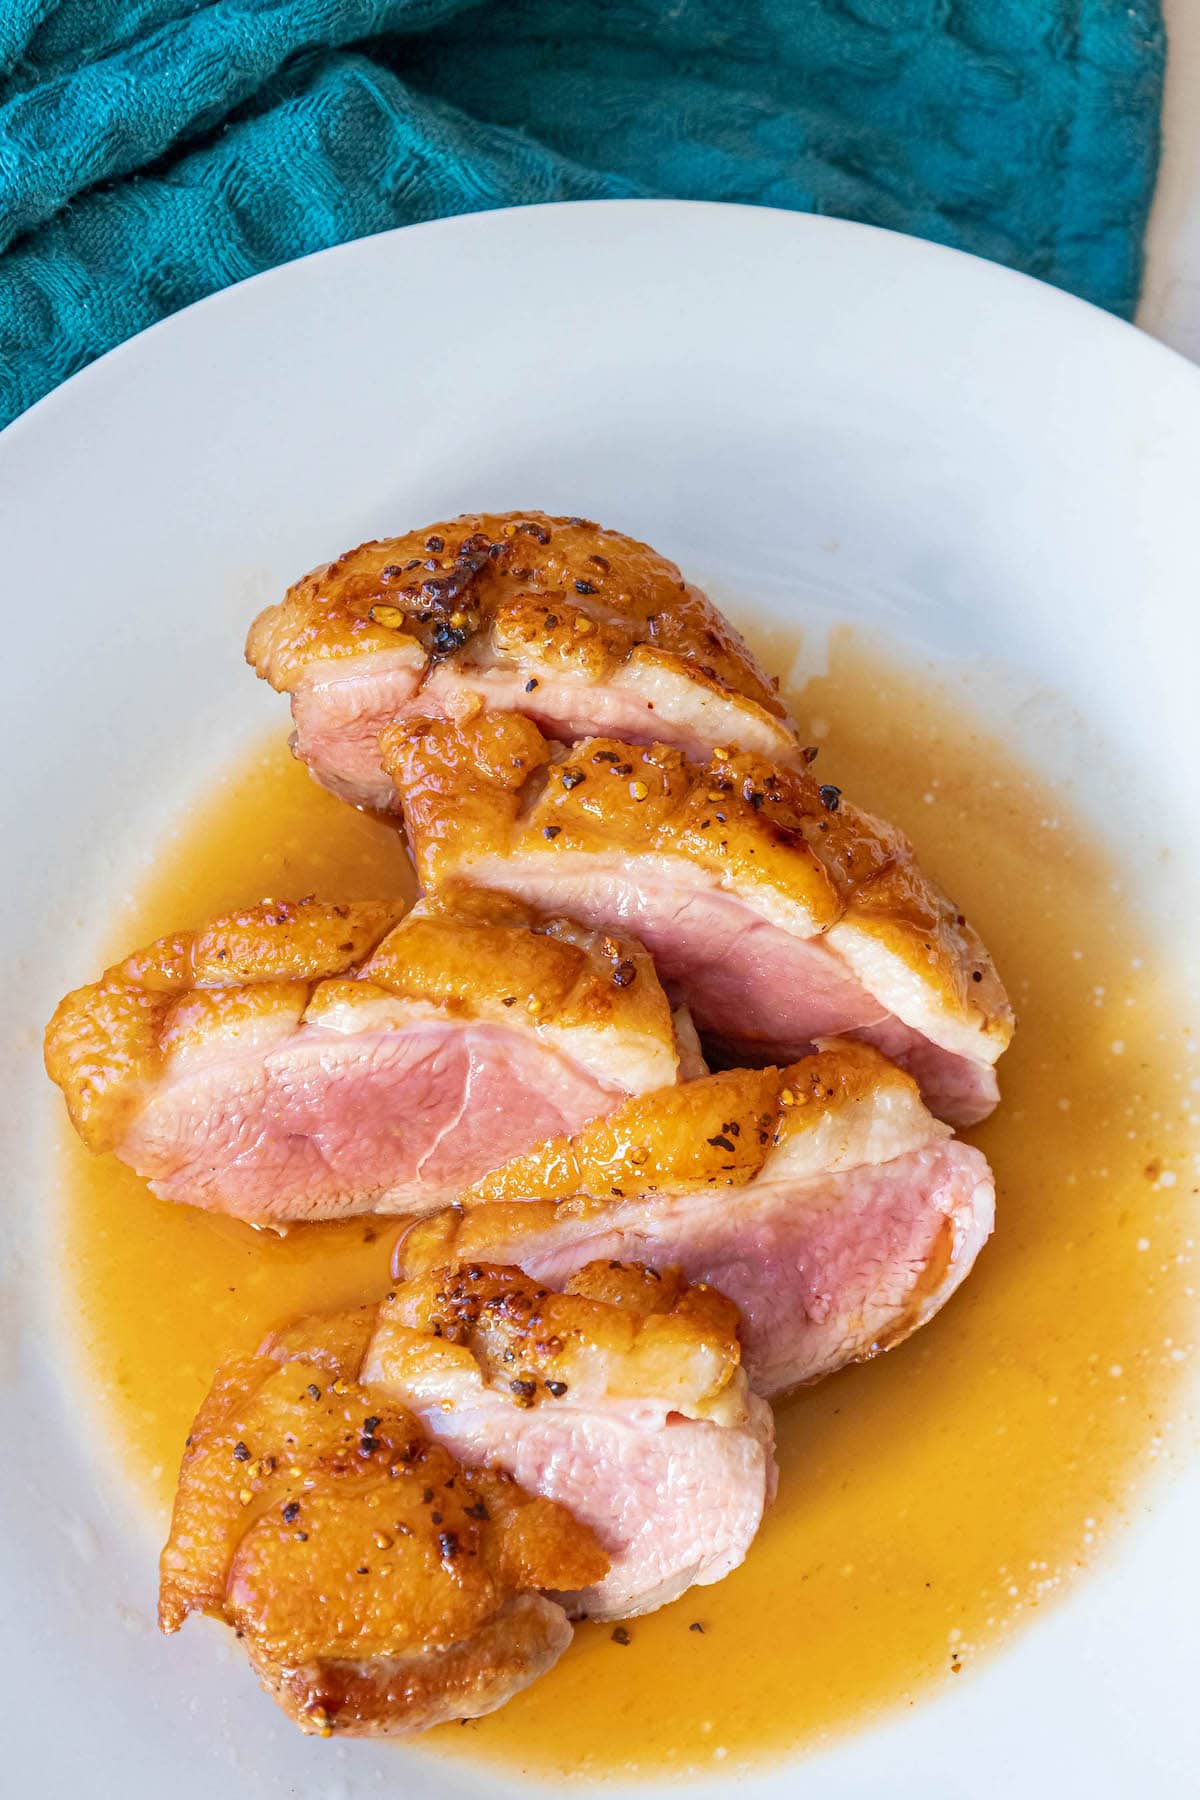 sliced duck breast with crispy fat  topped with an orange sauce on a plate